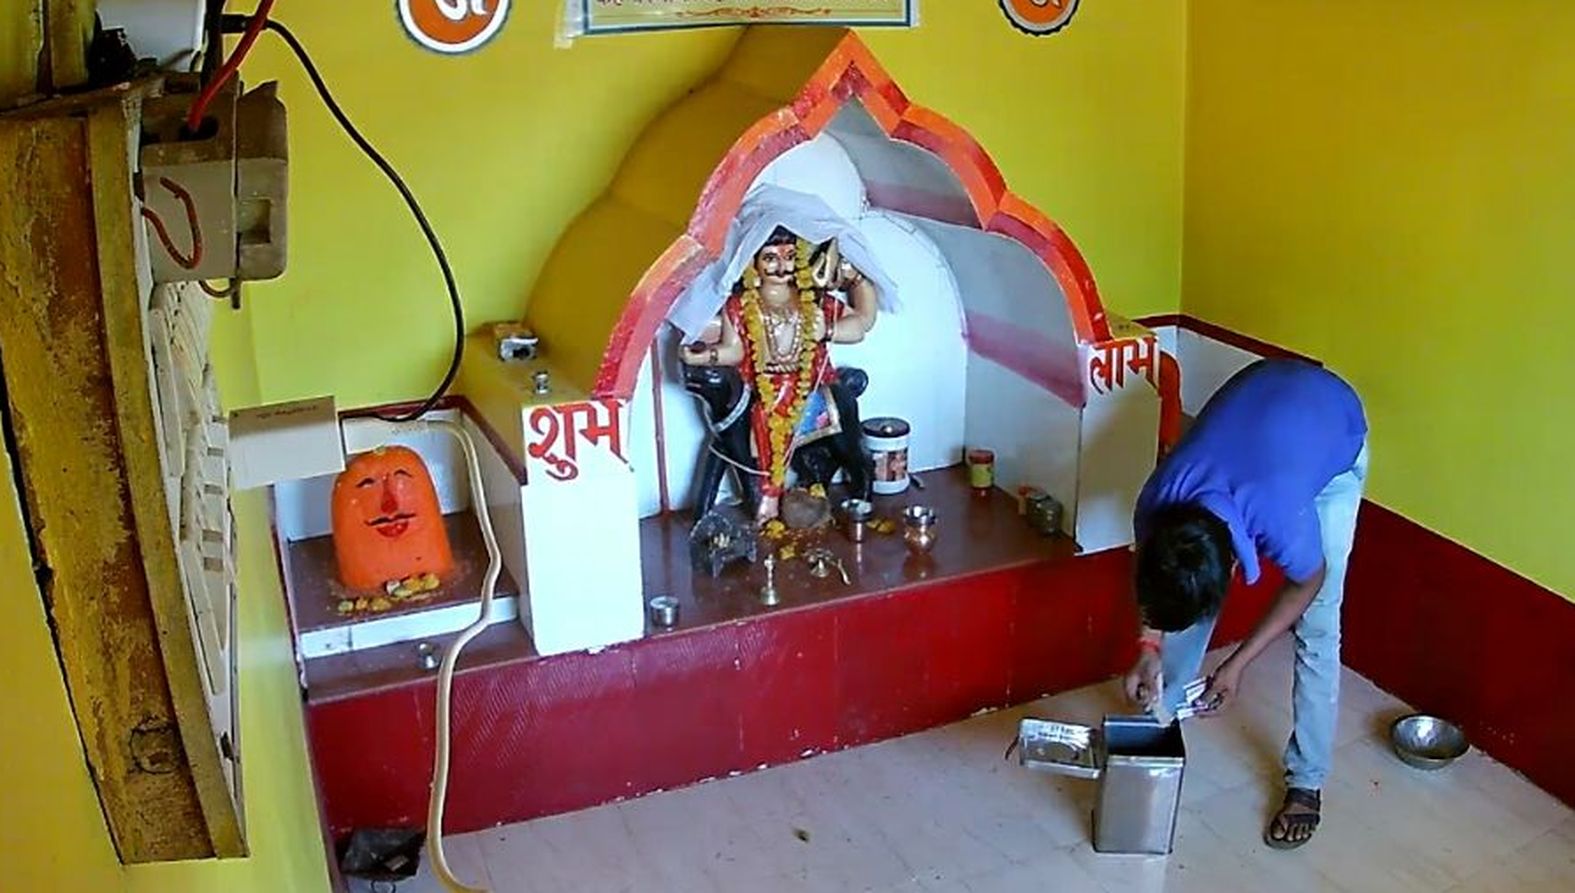 Young man entered Bhairavana temple